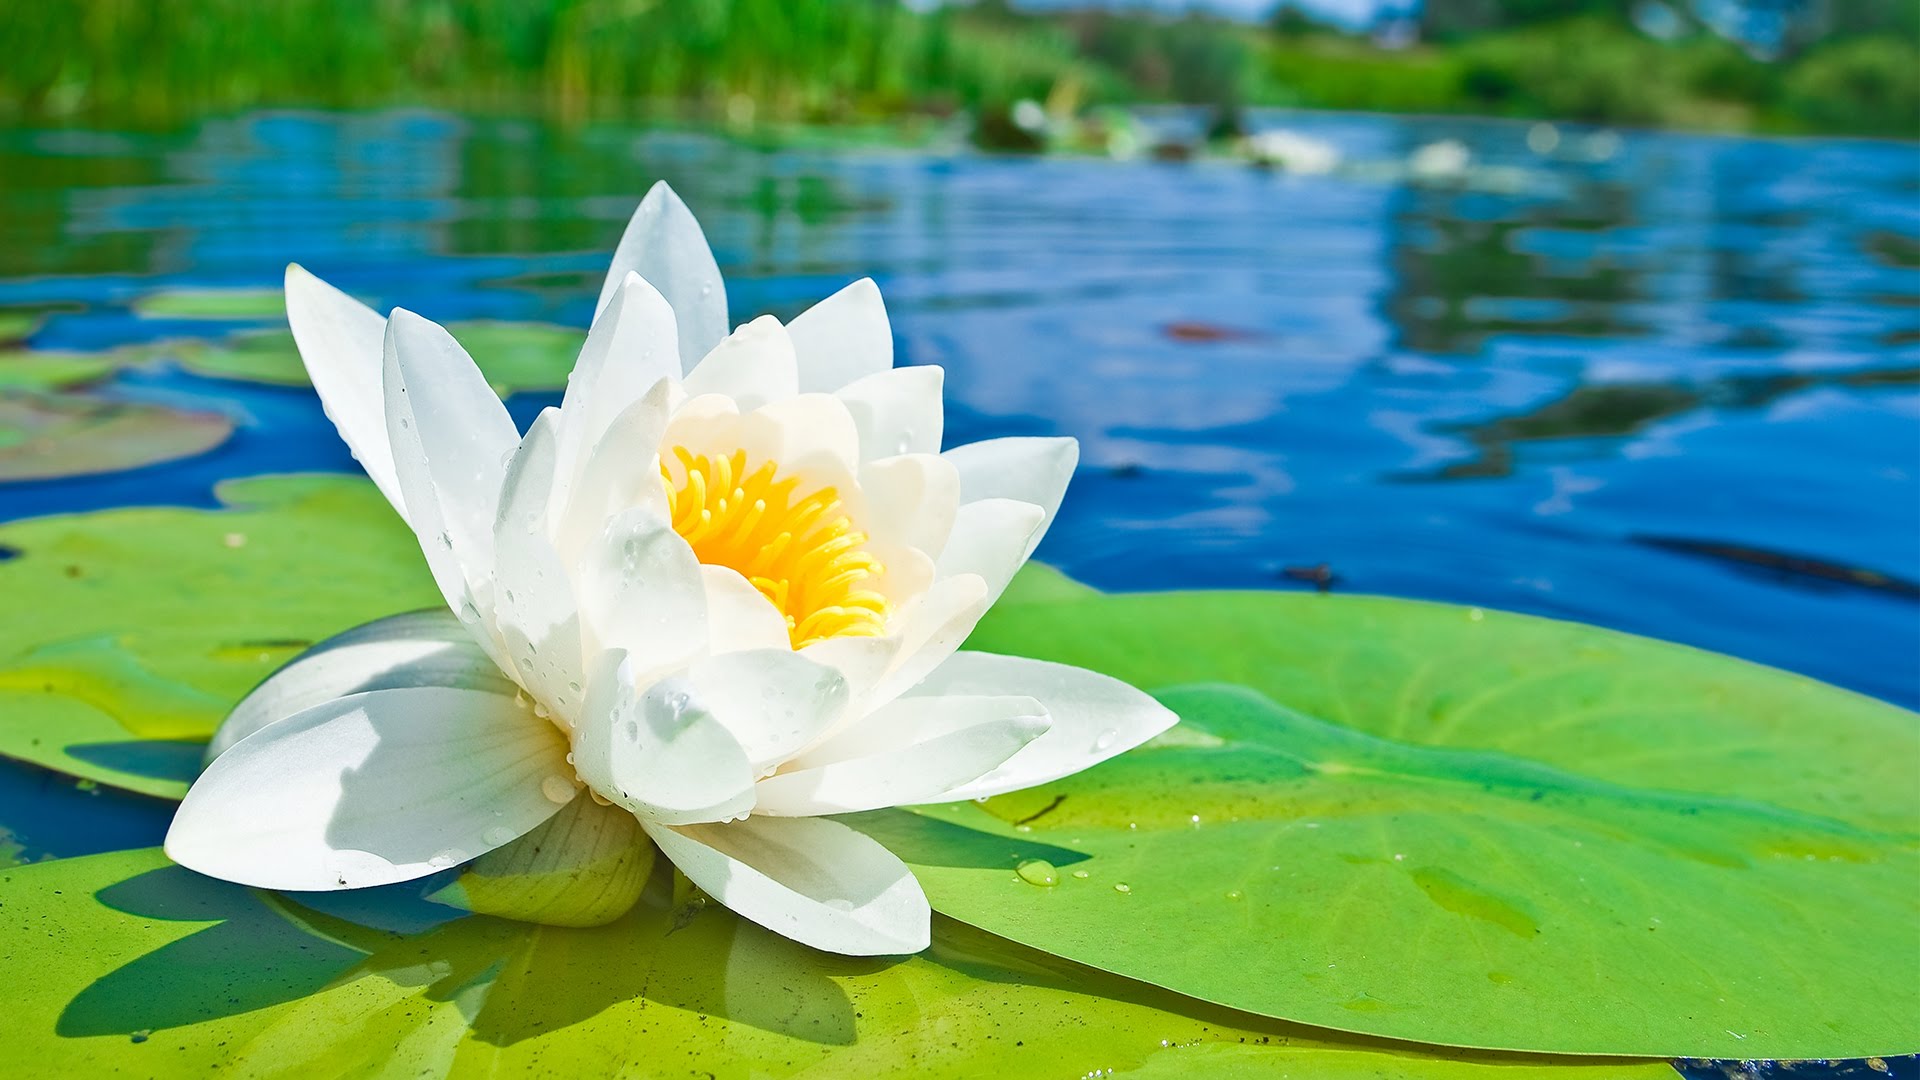 4 HOURS of Relaxing Music - White Lotus - Background for Stress ...